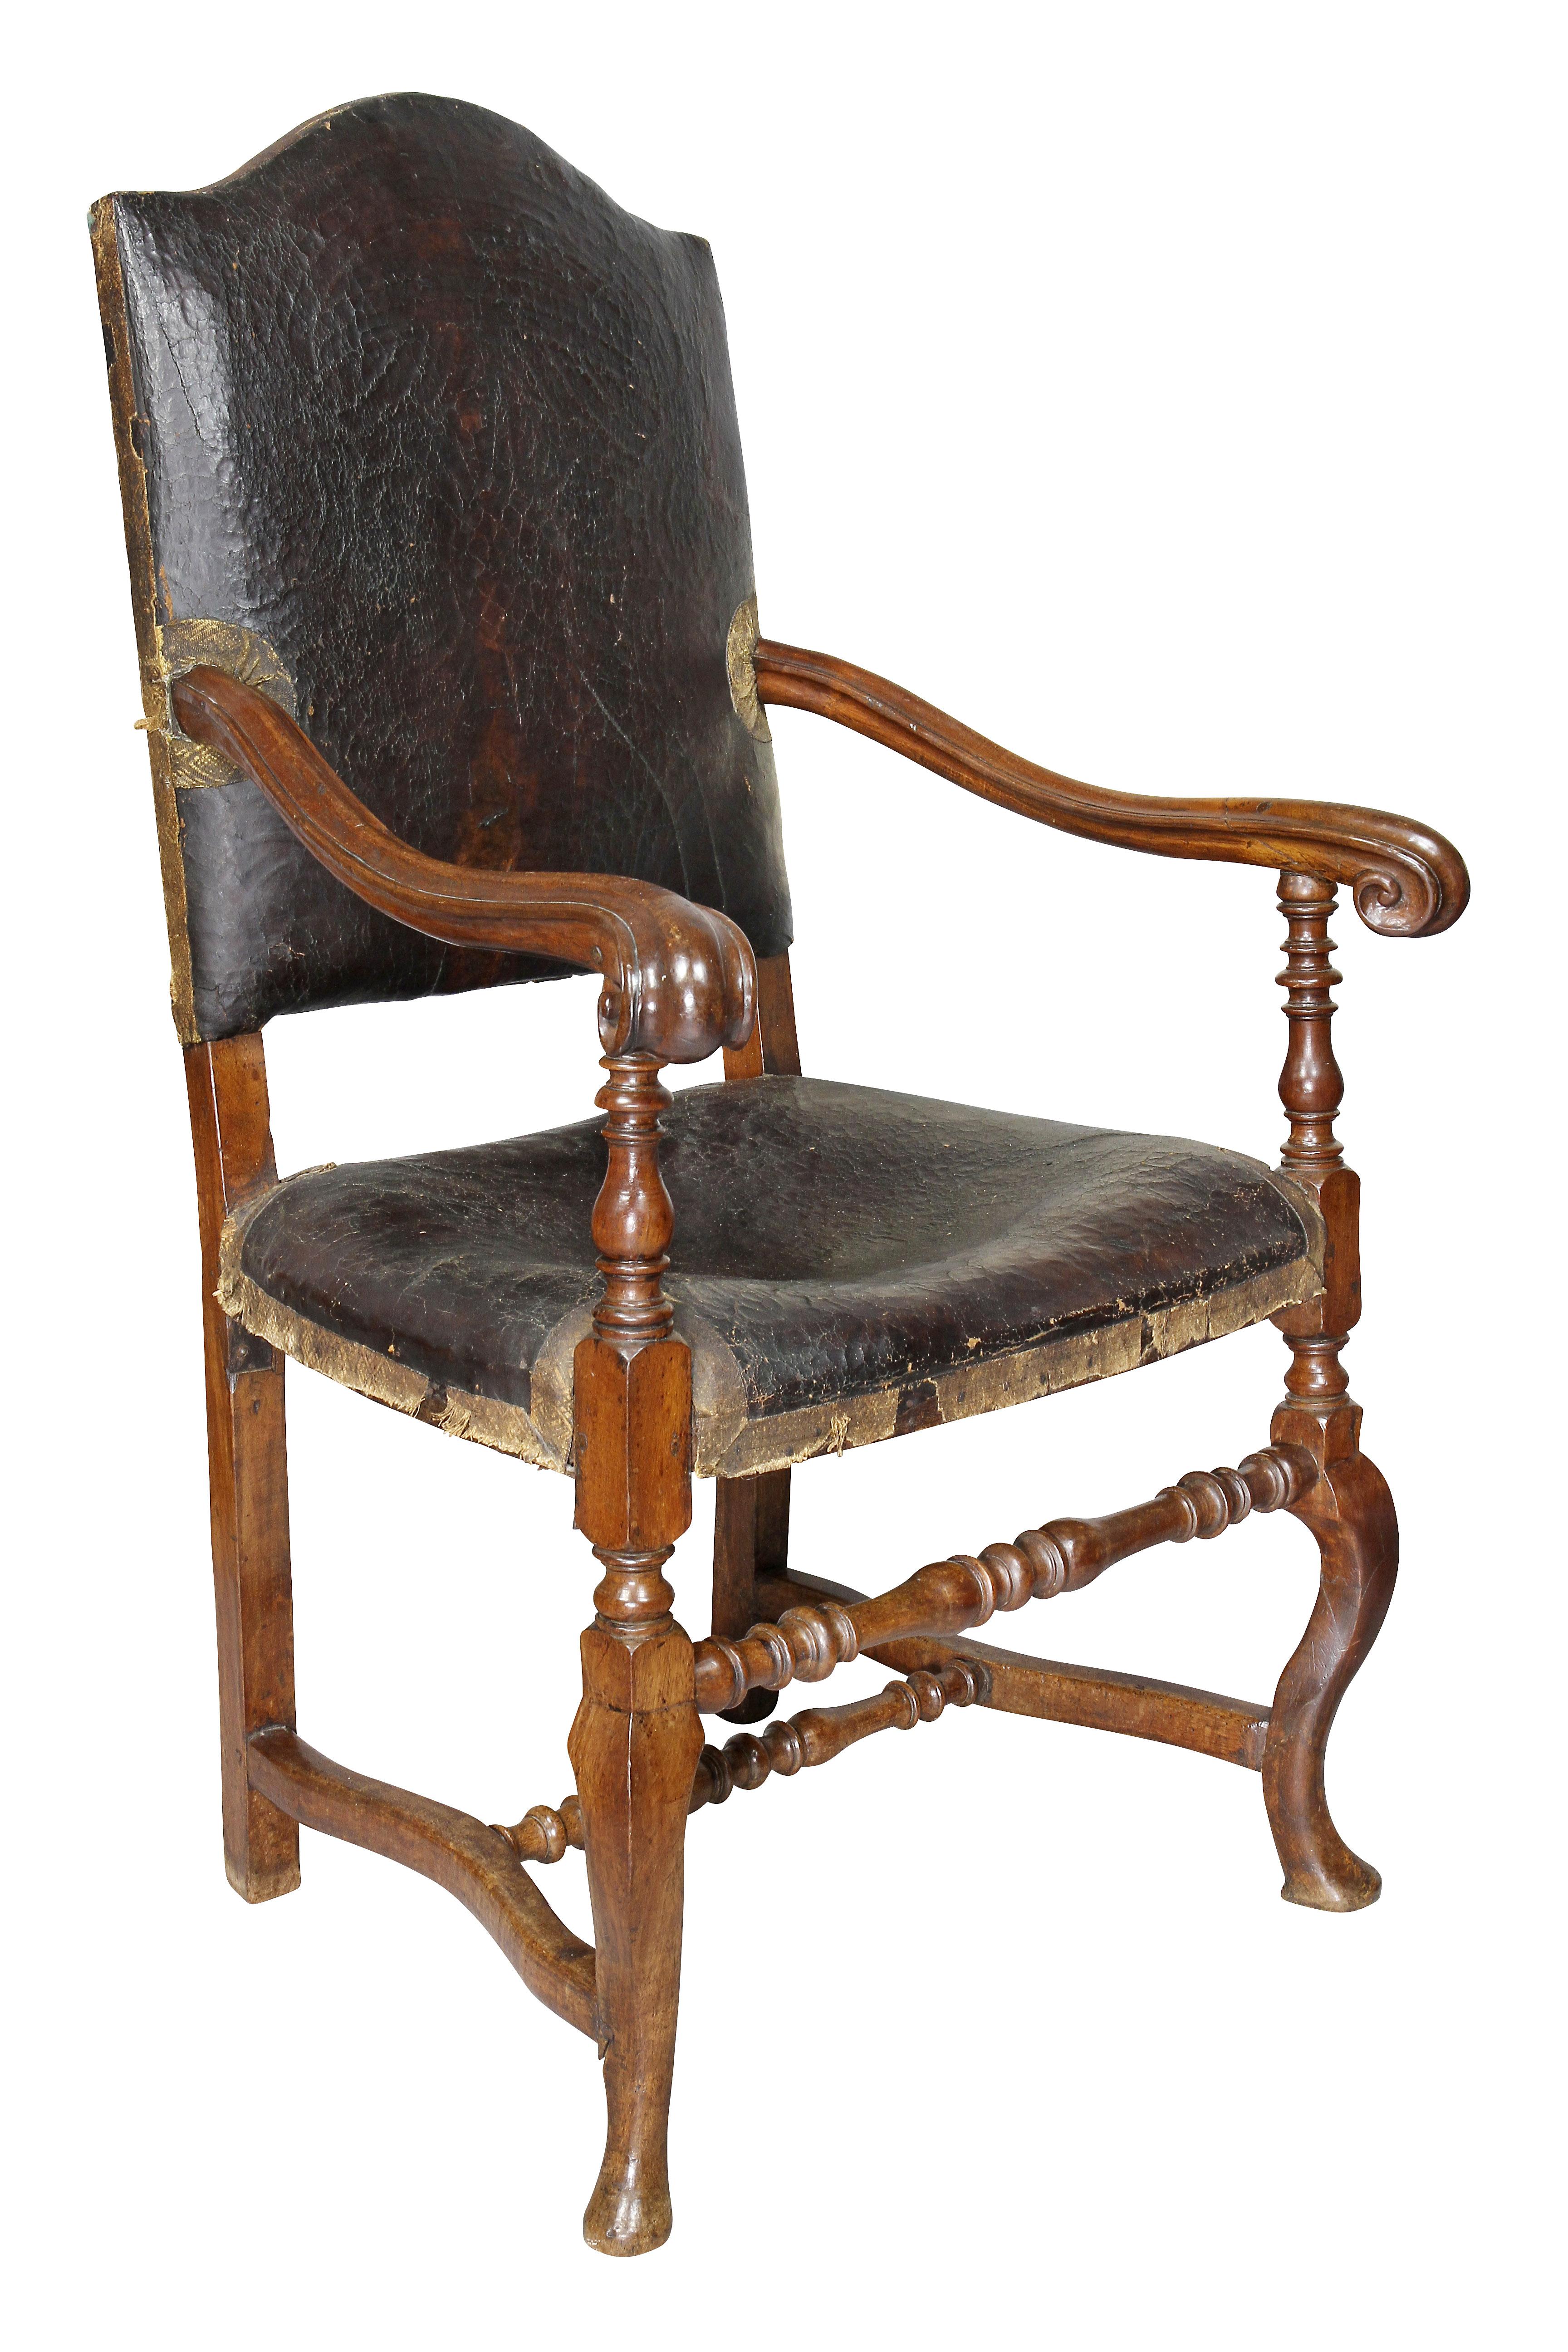 Each with an arched back with original leather, one chair the leather is distressed, carved arms and leather seats raised on slight cabriole legs joined by turned stretchers and pad feet. Provenance; Harvard Art Museum. Generous proportions and